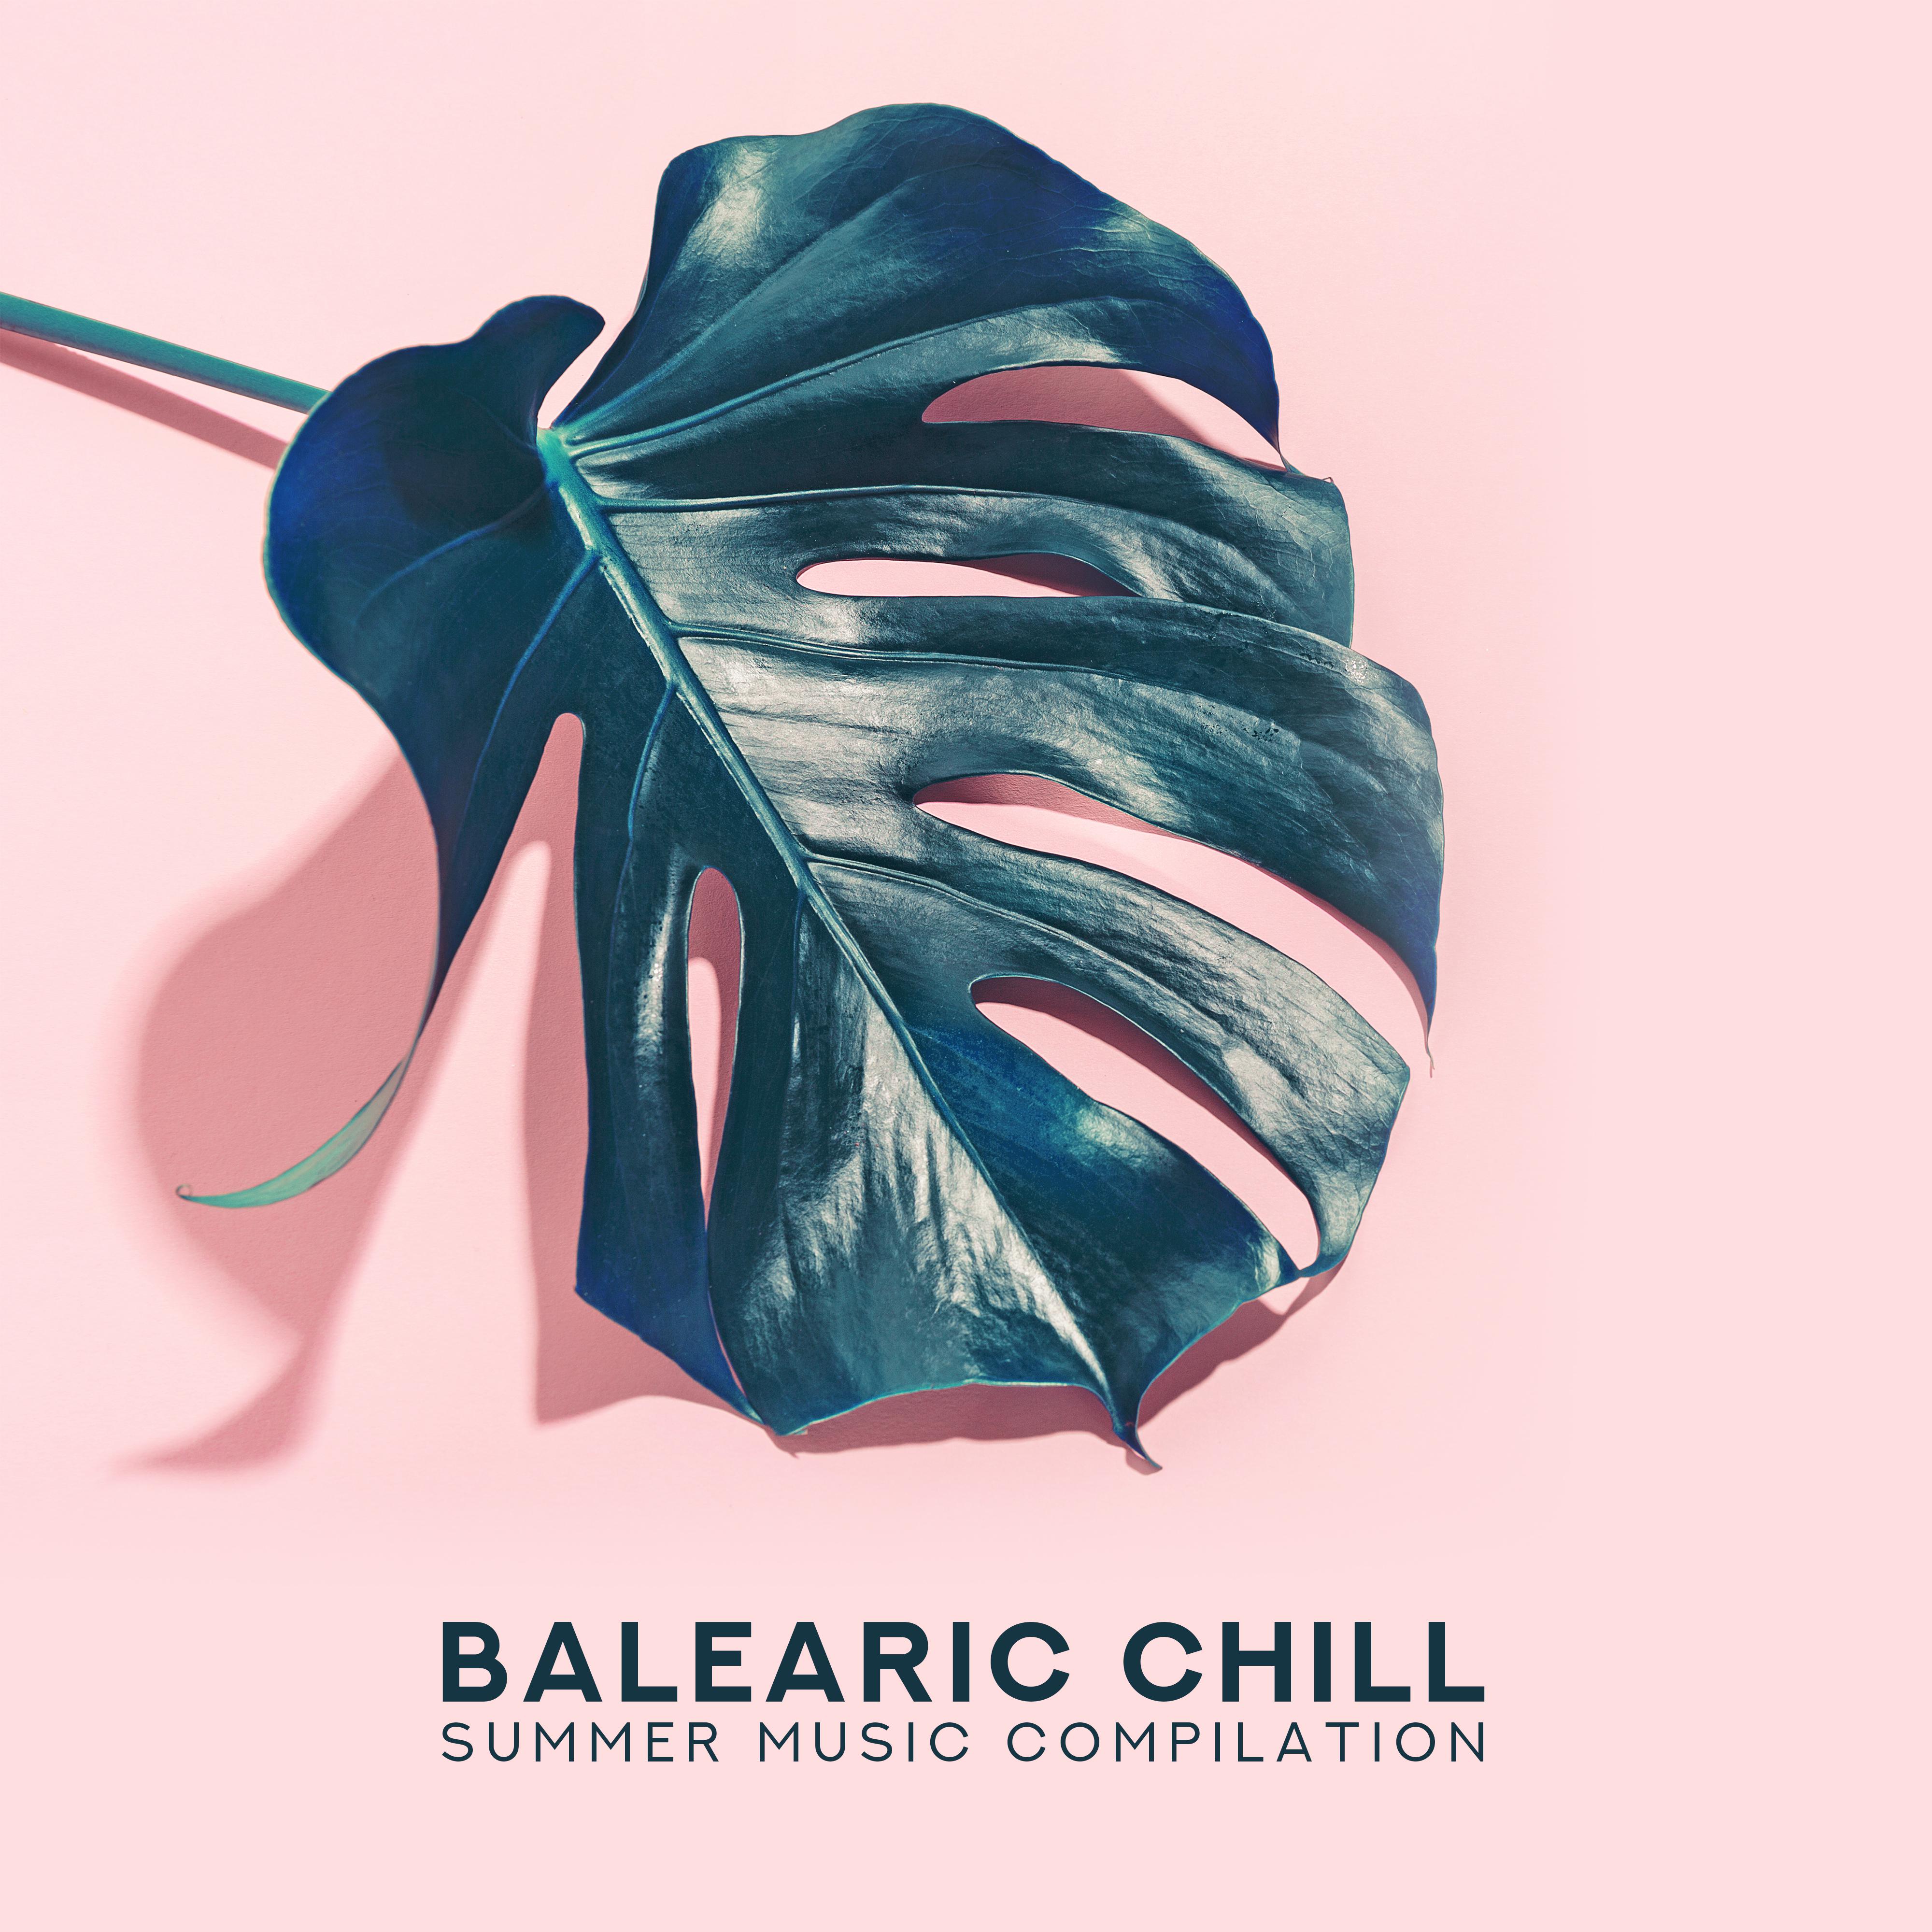 Balearic Chill Summer Music Compilation: 15 Electronic Beats for Beach Relaxation, Siesta Songs, Tropical Holidays